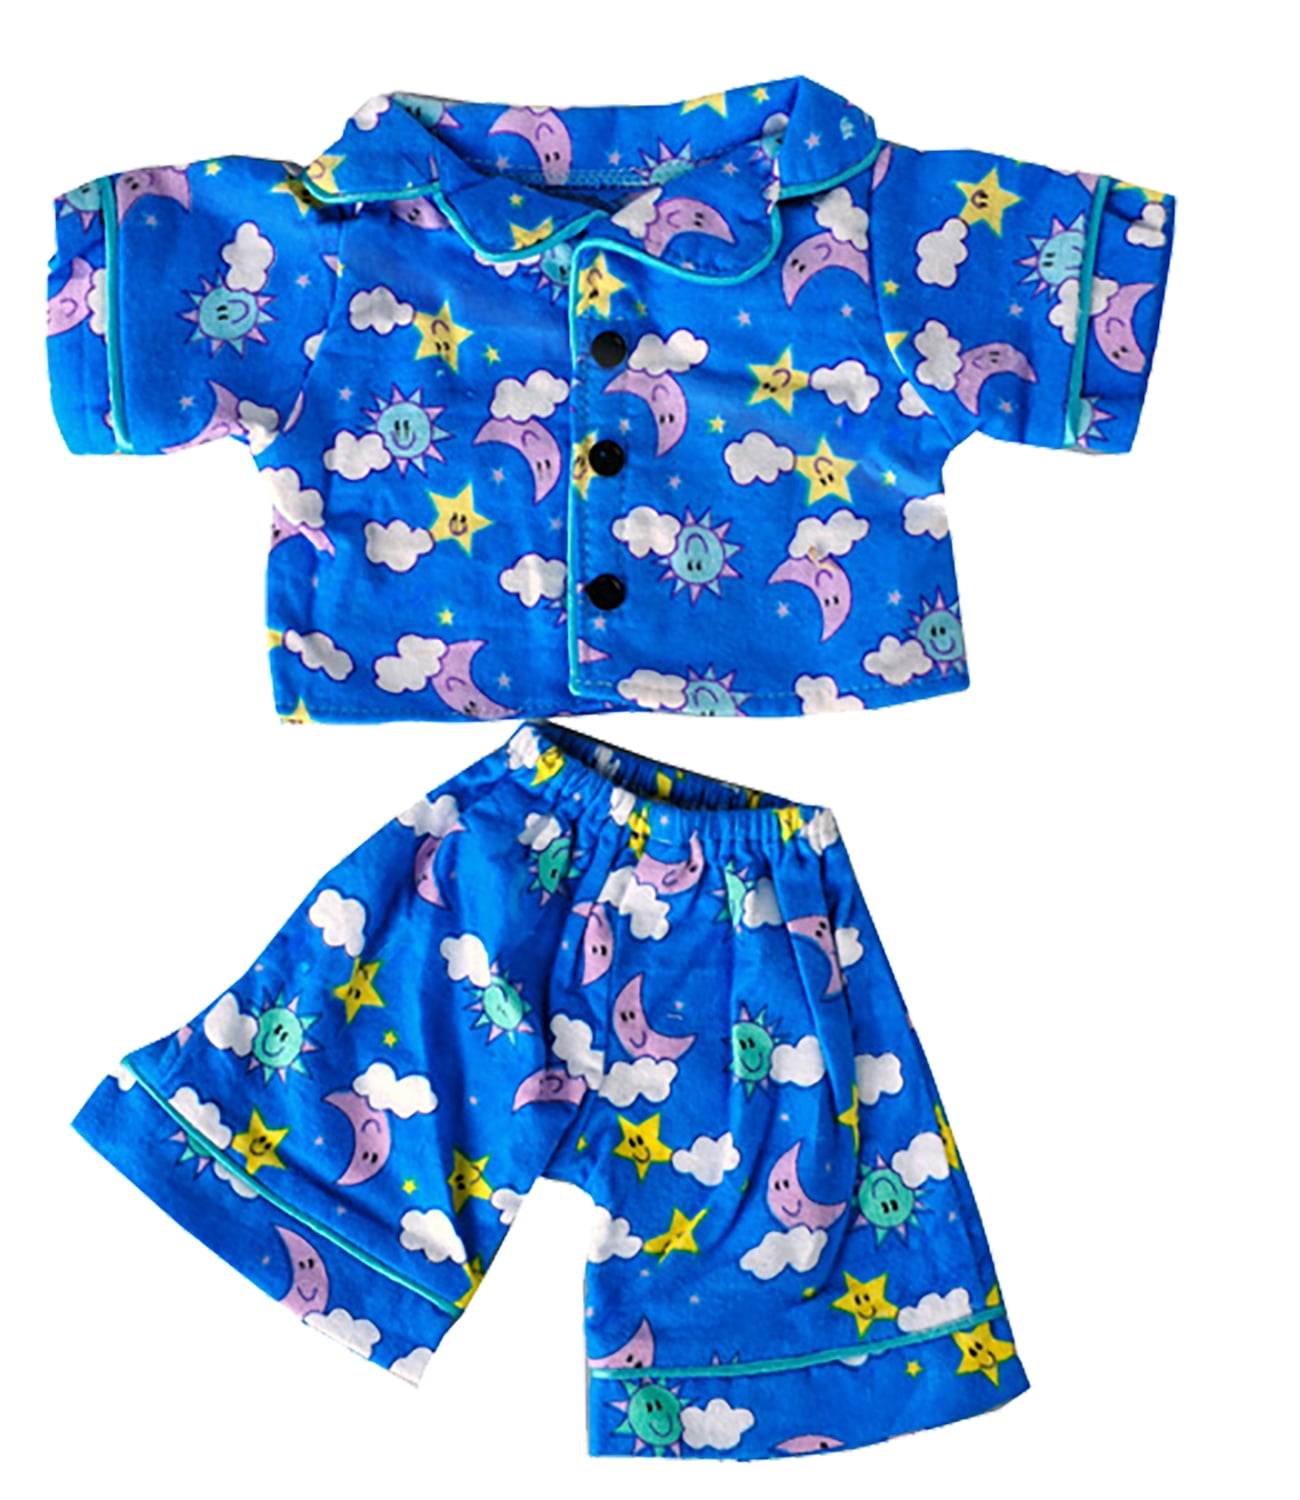 Sunny Days Blue Pj's Teddy Bear Clothes Outfit Fits Most 14